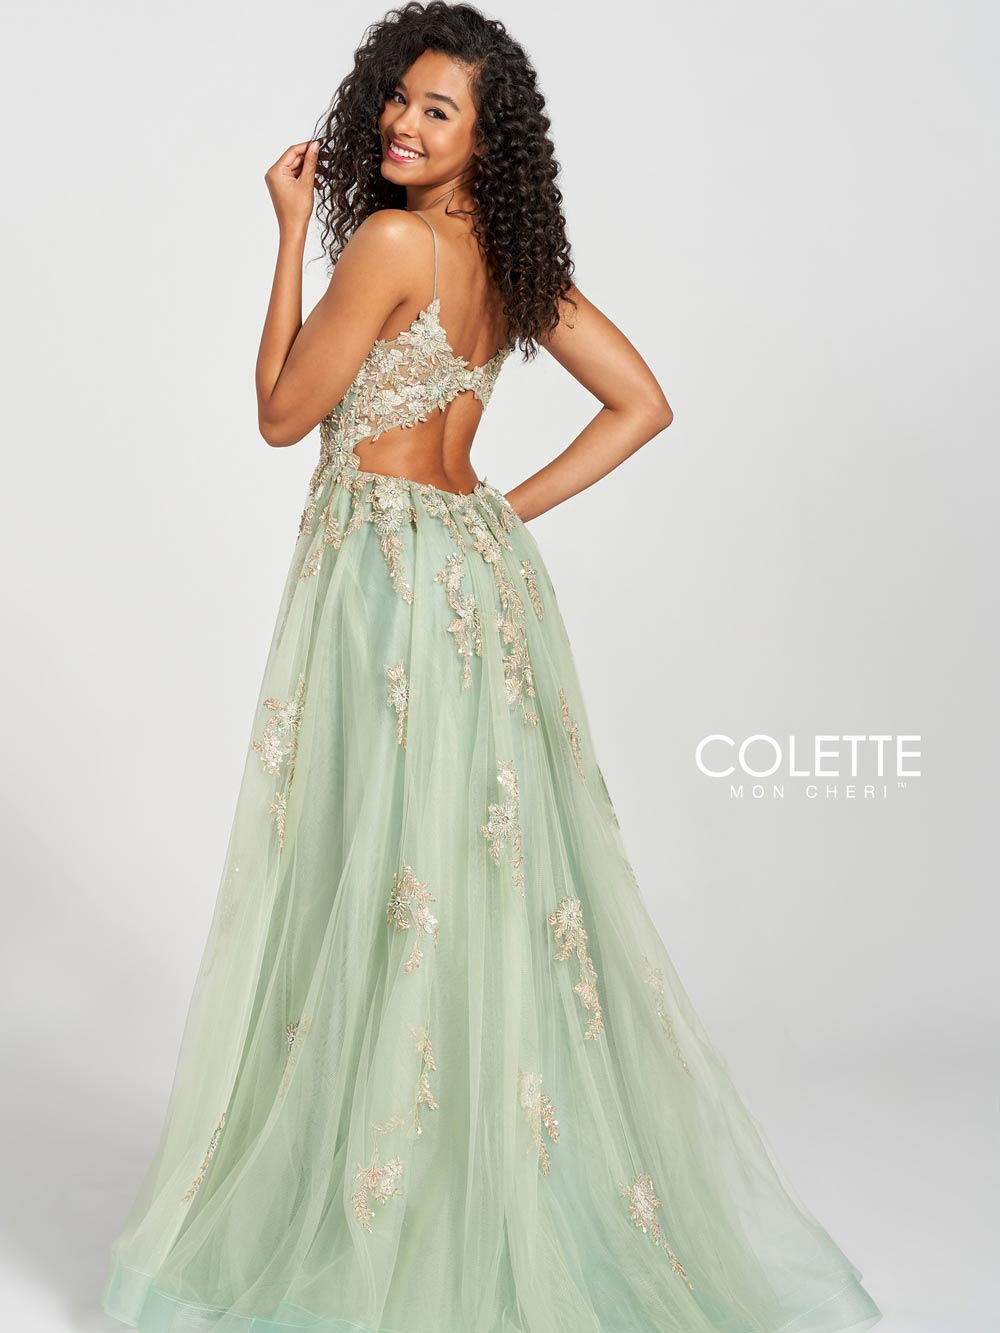 black curly haired model wearing an ivy prom dress. photo taken from the backside of the model